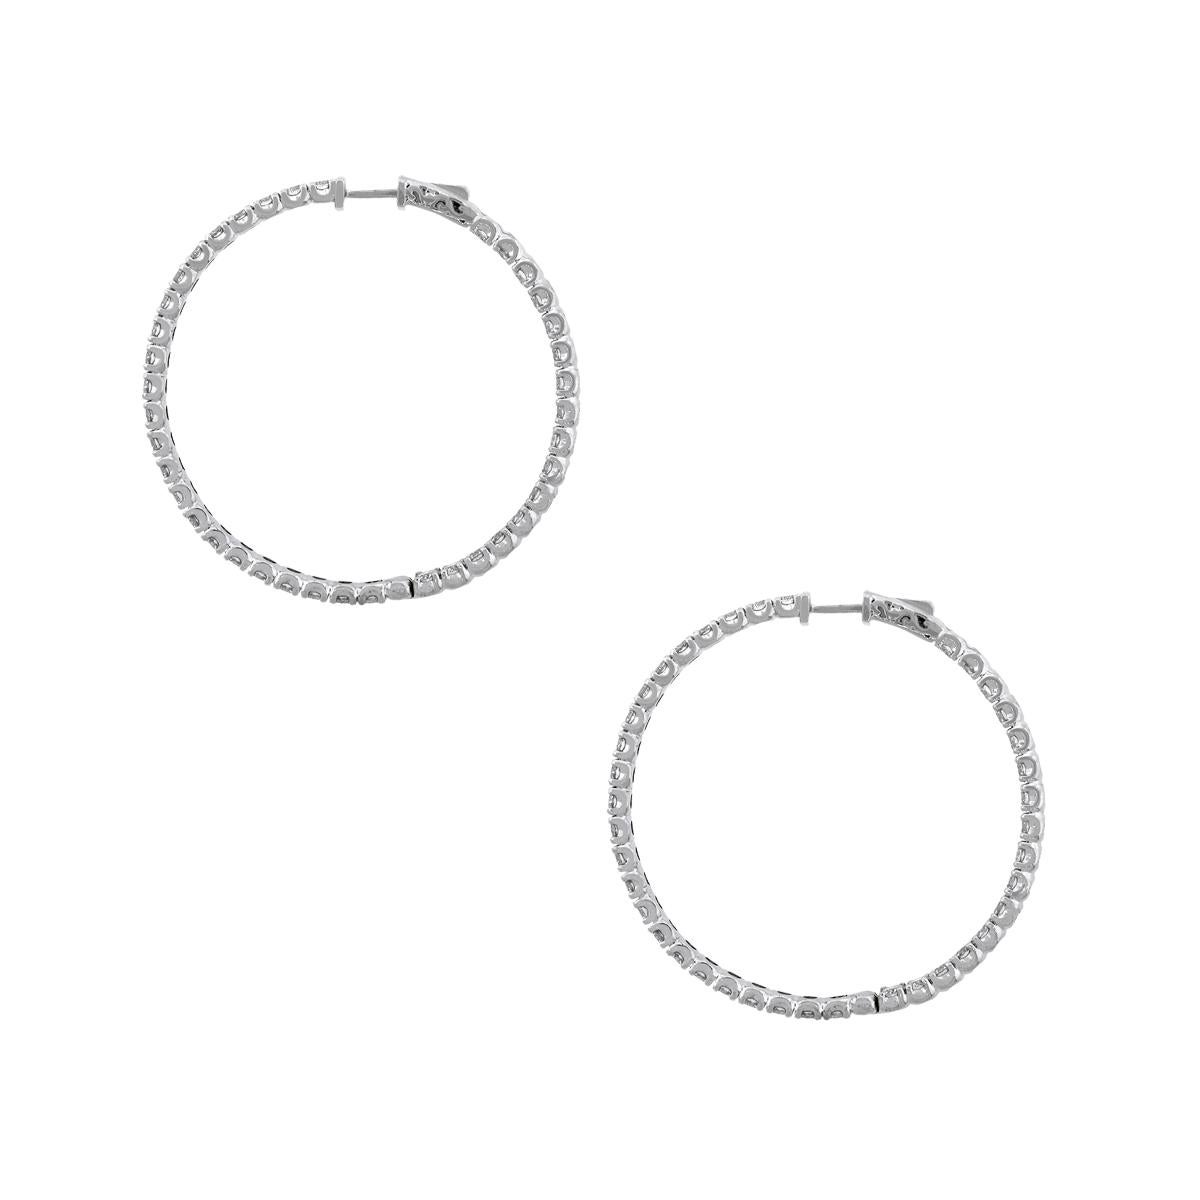 Material: 14k white gold
Style: Diamond inside out hoop earrings
Diamond Details: 78 Stones, approximately 9.01ctw of round brilliant diamonds. Diamonds are G/H in color and VS in clarity.
Earring Measurements: 1.88″ x 0.15″ x 1.96″
Total Weight: